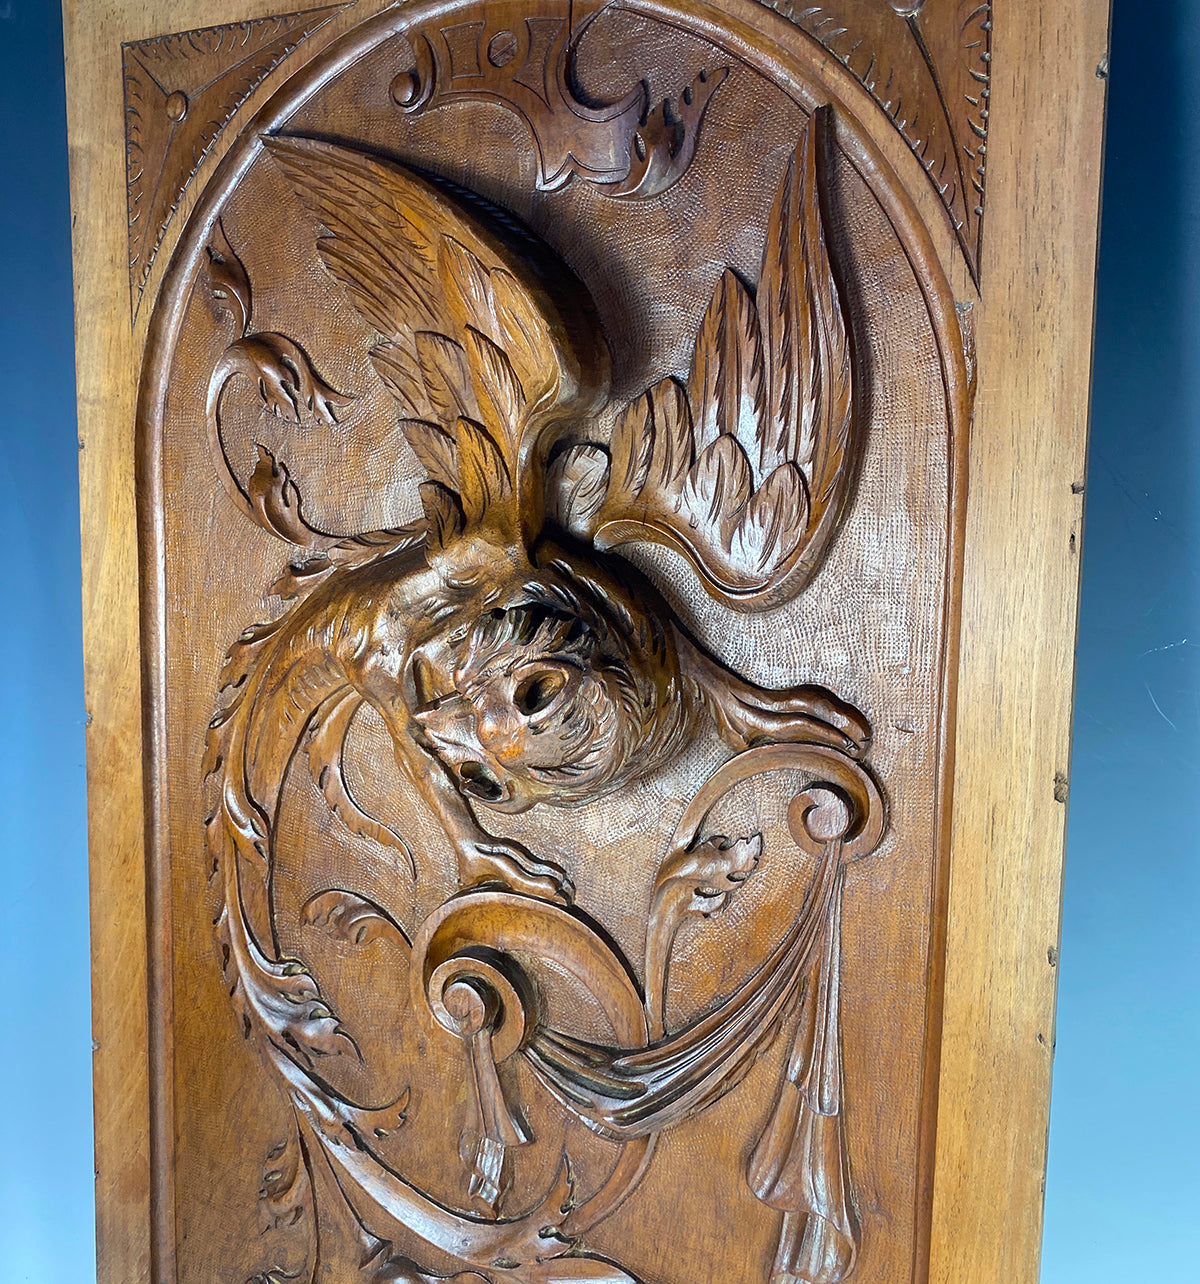 Antique French HC Wood 25" Cabinetry Panel, Sculpture, Neoclassical with Griffen Gryphon